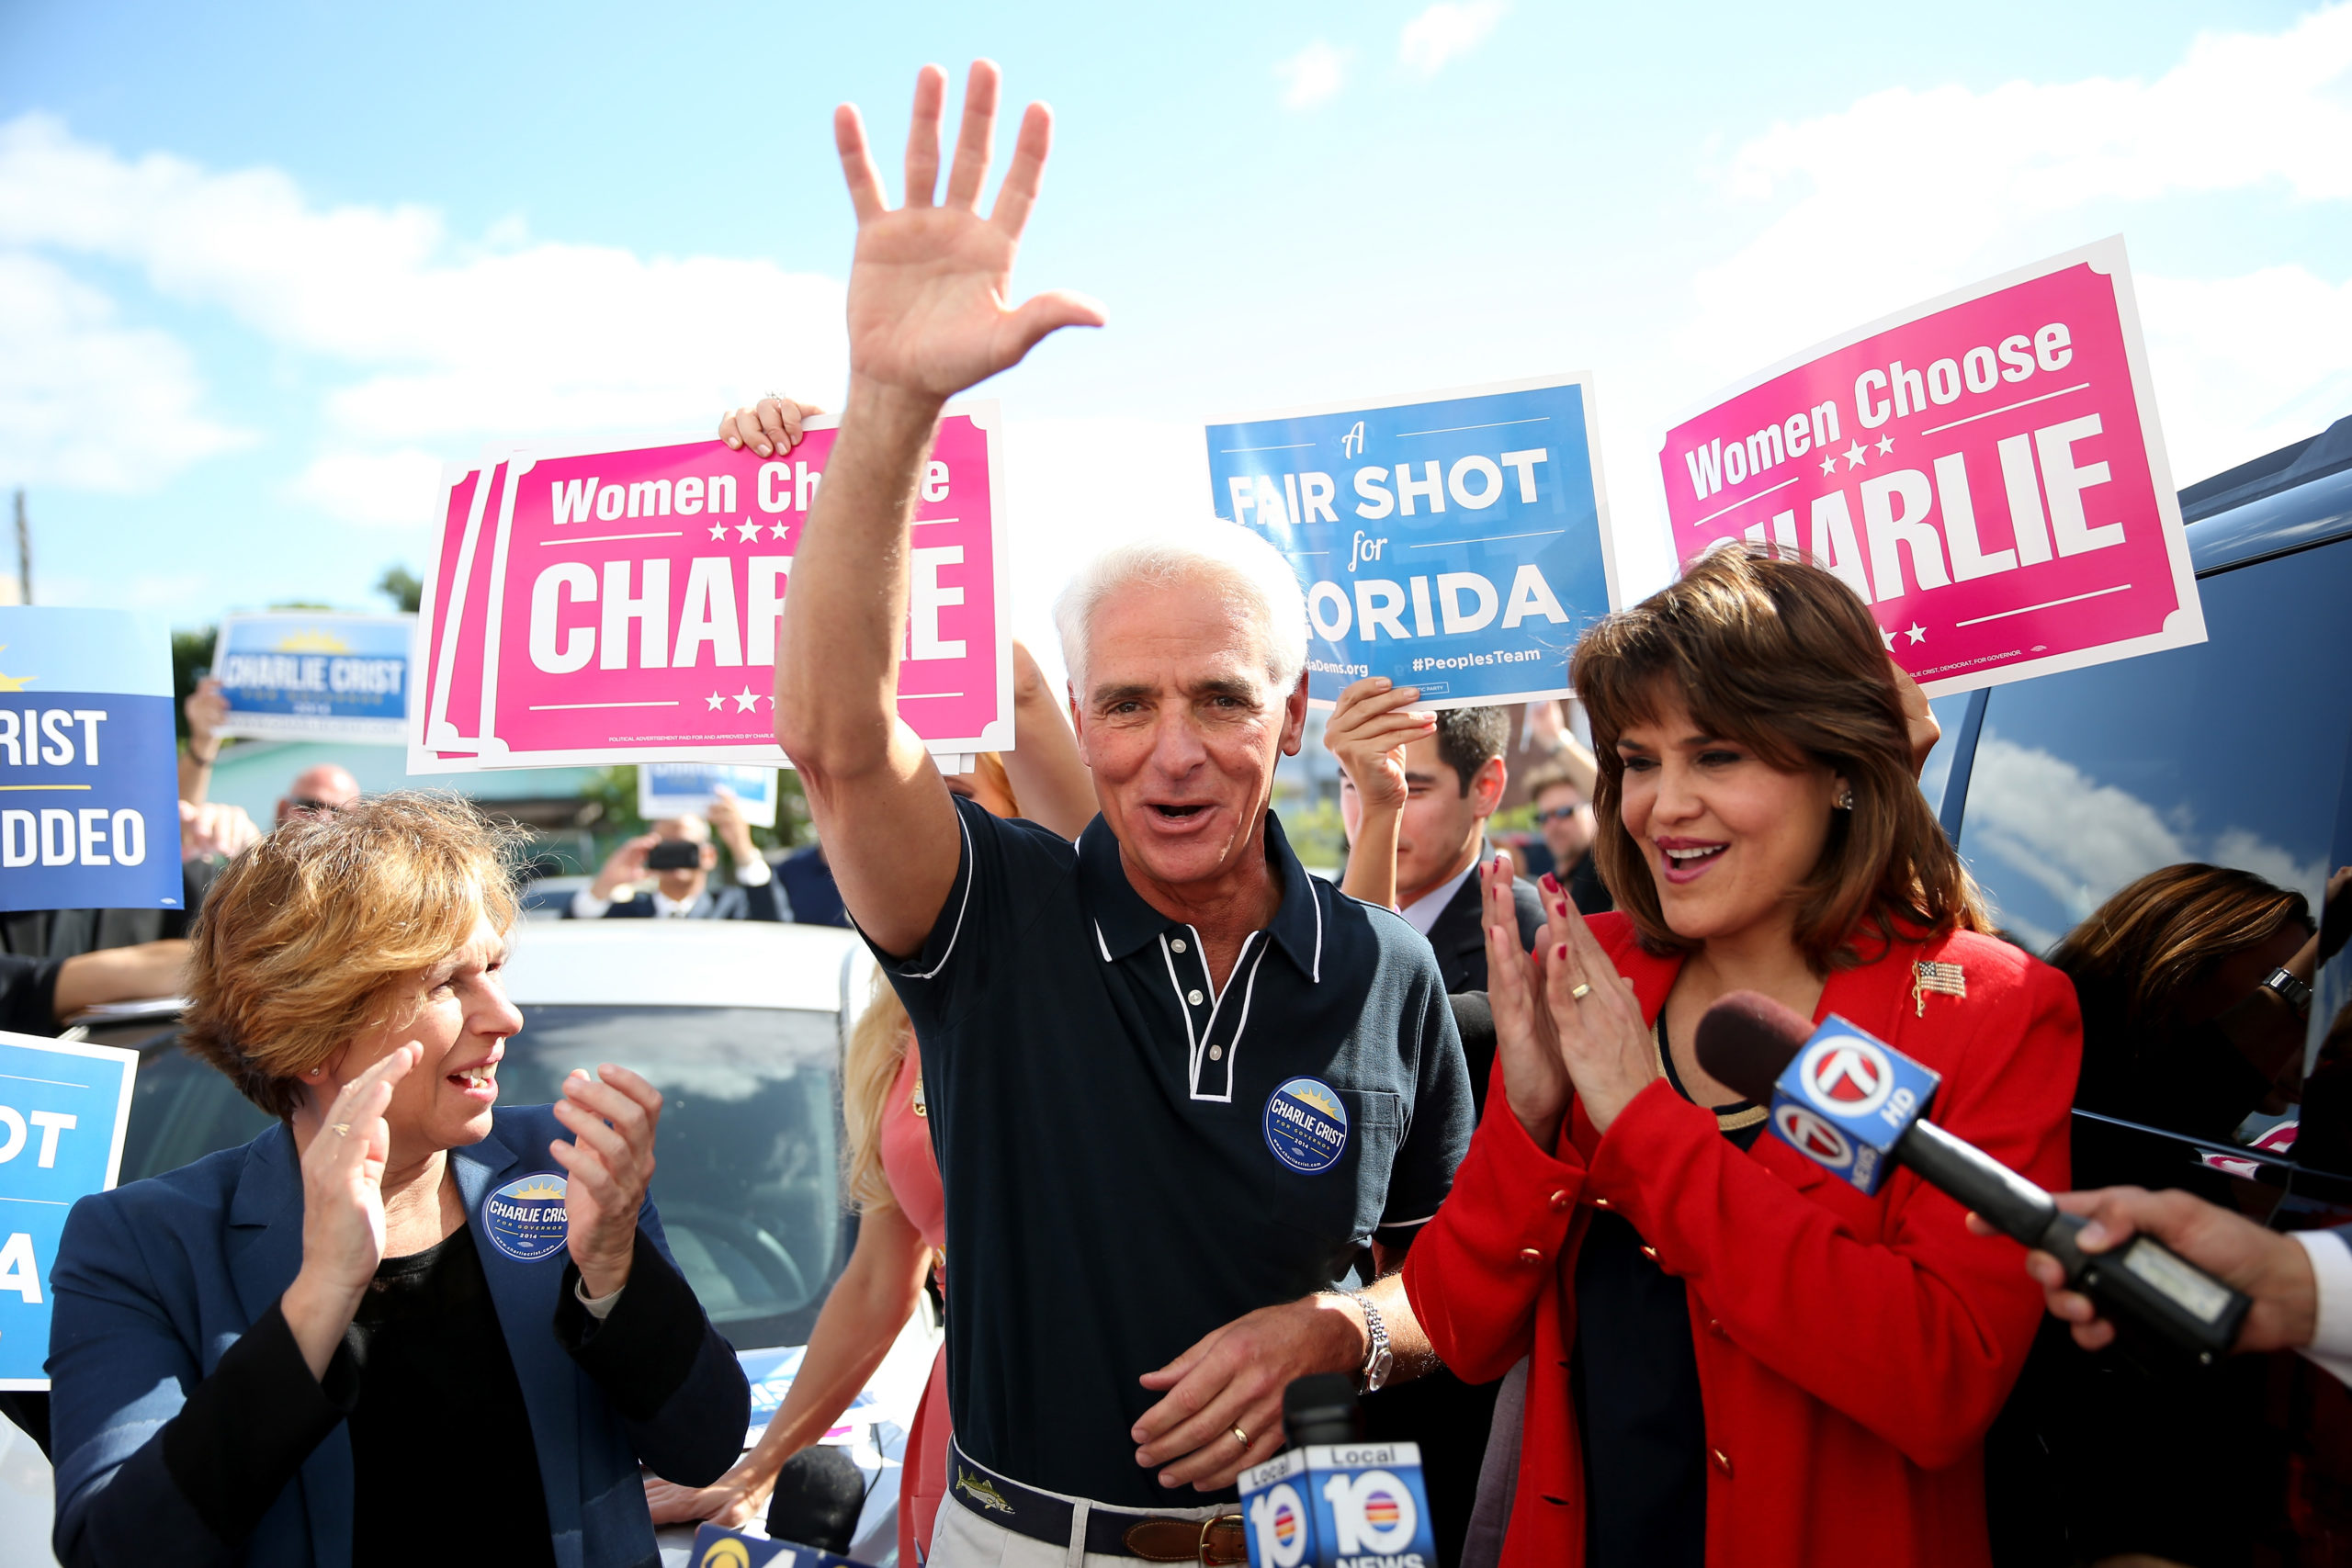 Gubernatorial Candidate Charlie Crist Campaigns In Final Days Before Election Day